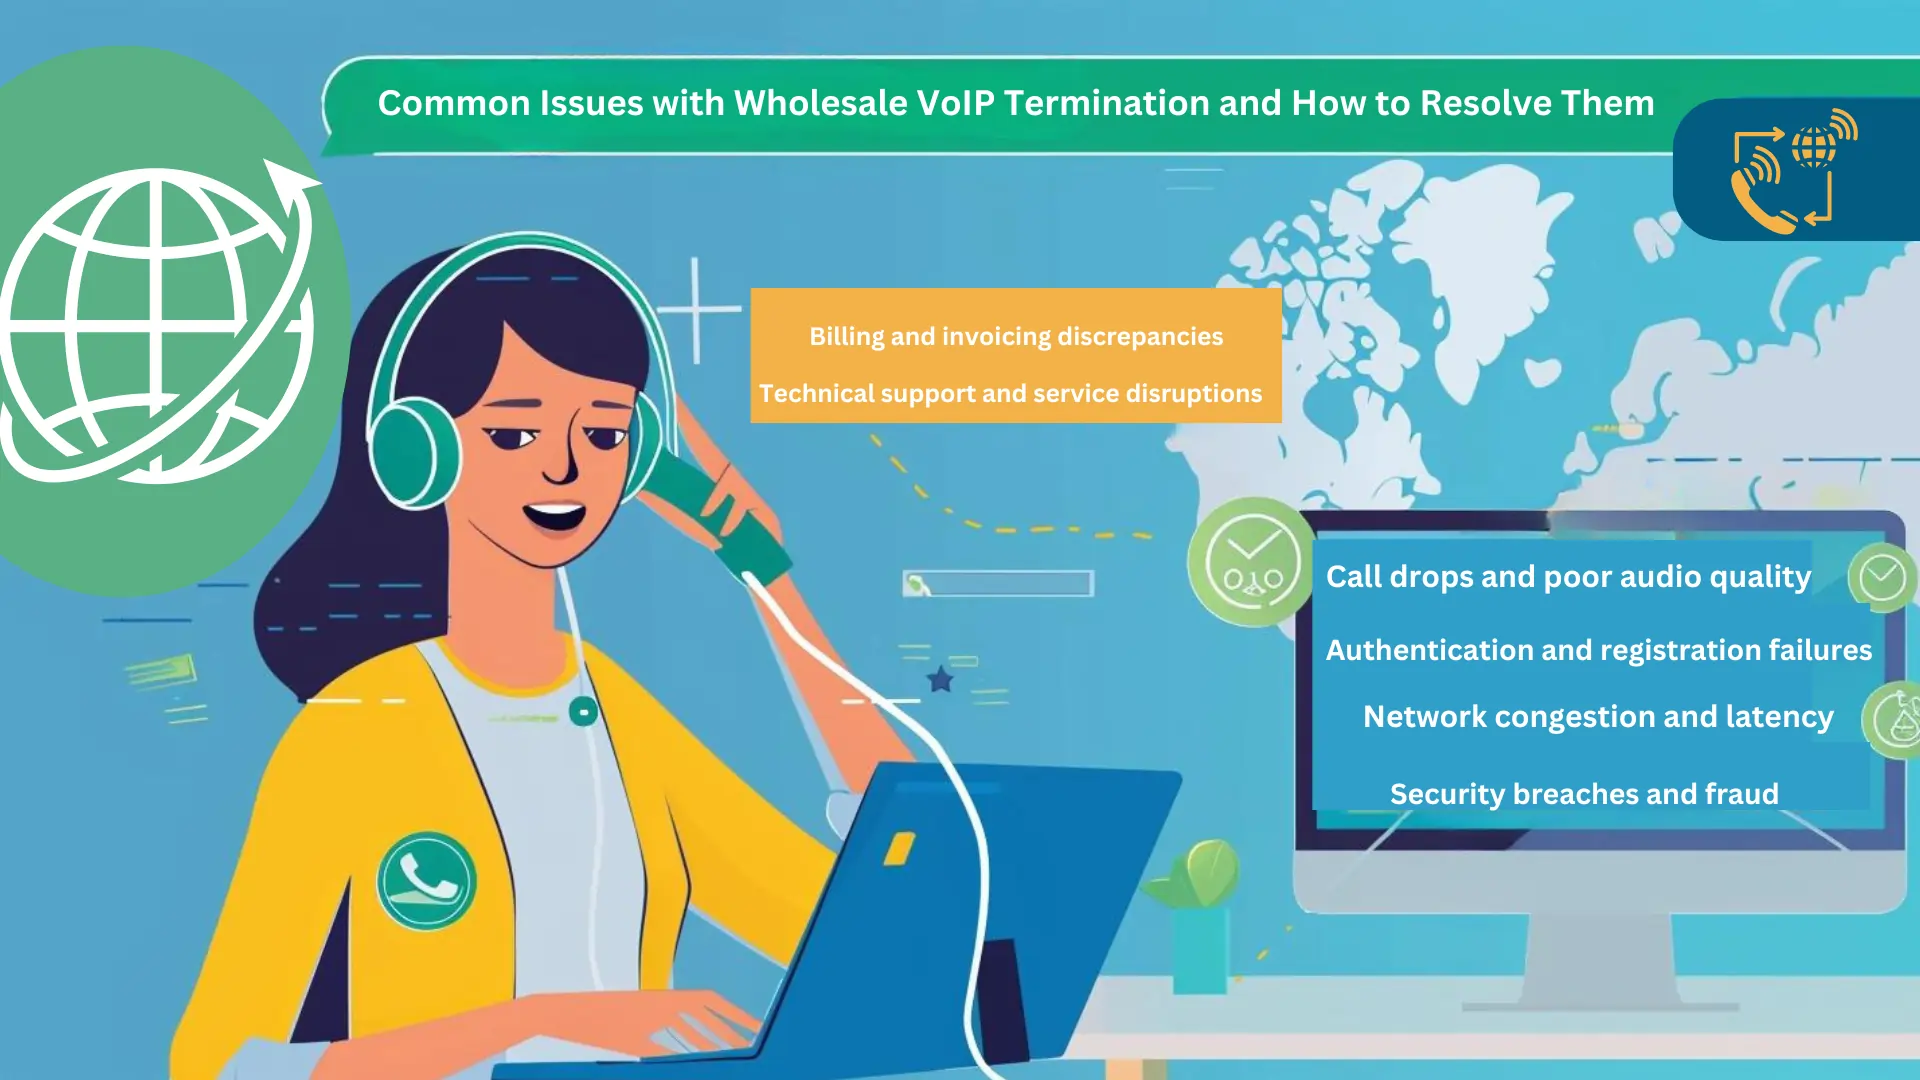 Common Issues with Wholesale VoIP Termination and How to Resolve Them
